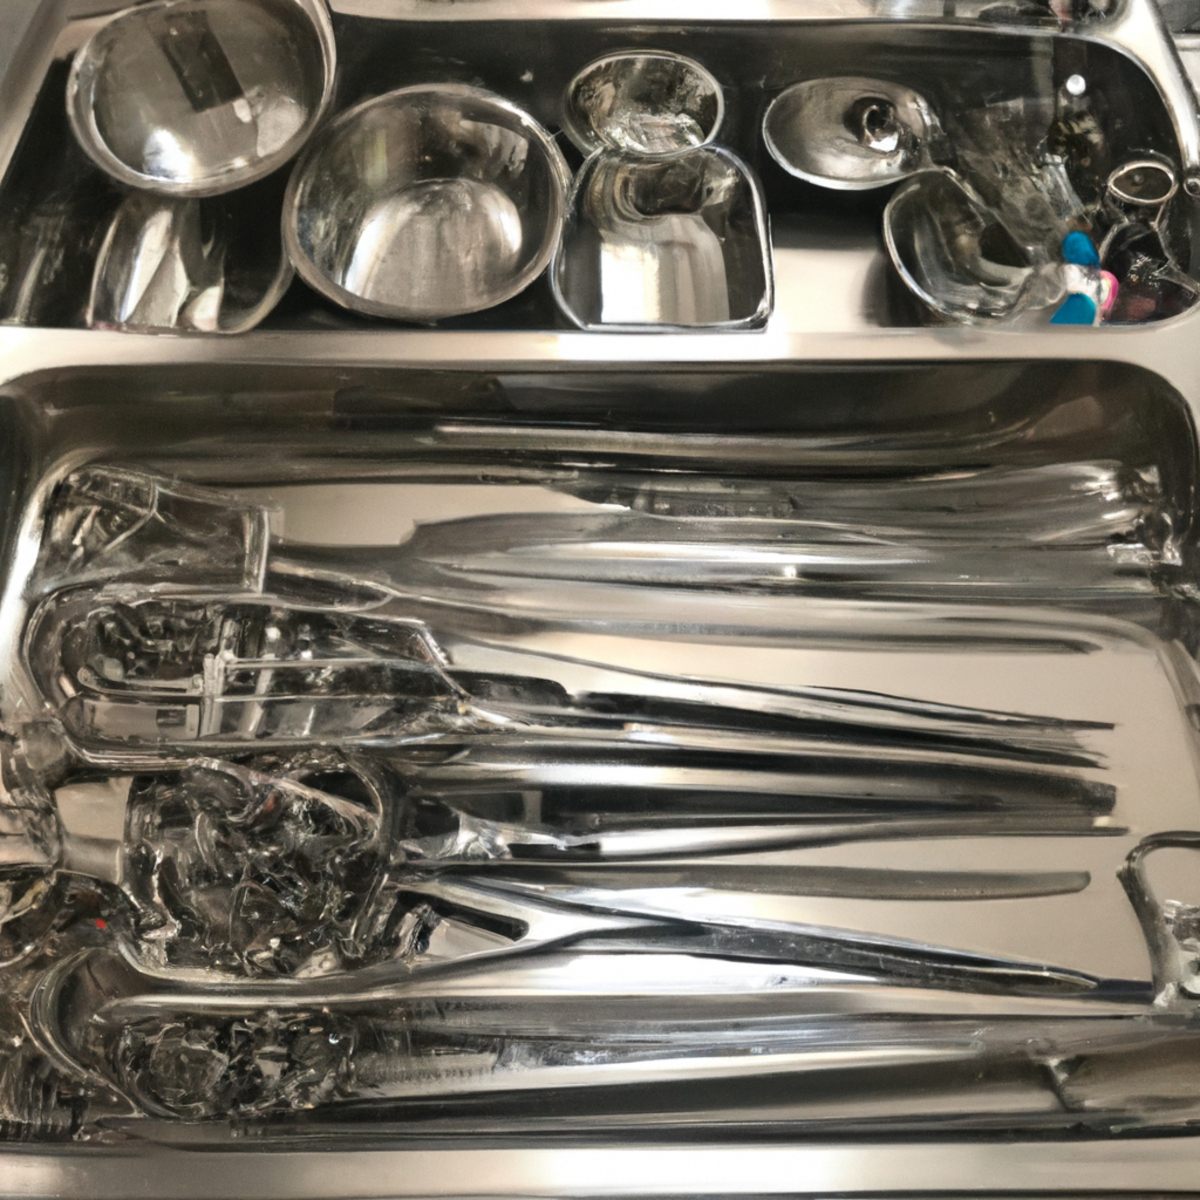 Neatly arranged surgical tools on a tray, showcasing precision and attention to detail in the field of surgery.